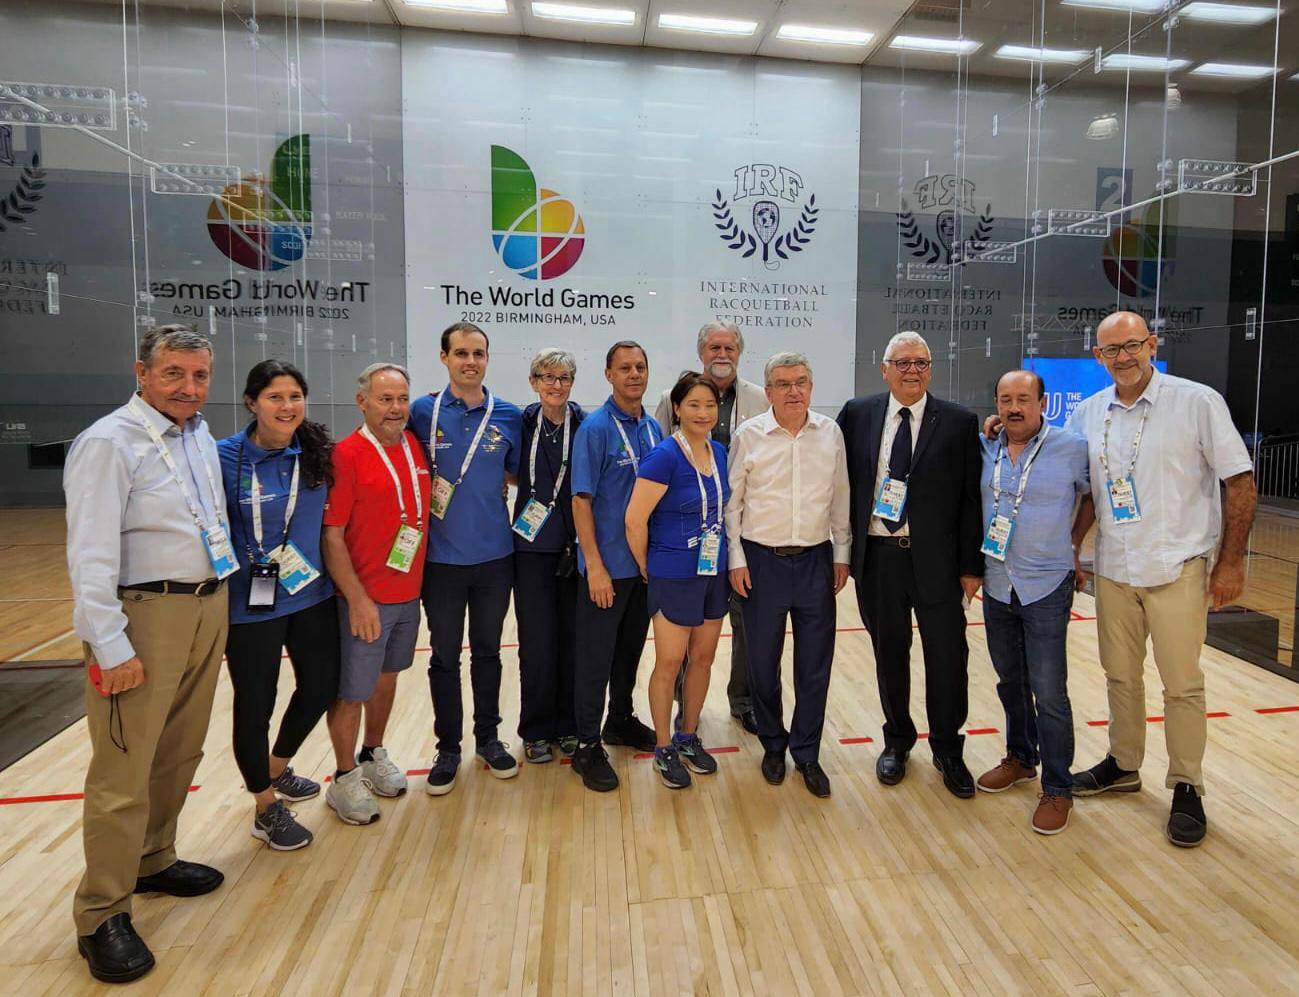 Racquetball at the World Games was visited by IOC President Thomas Bach